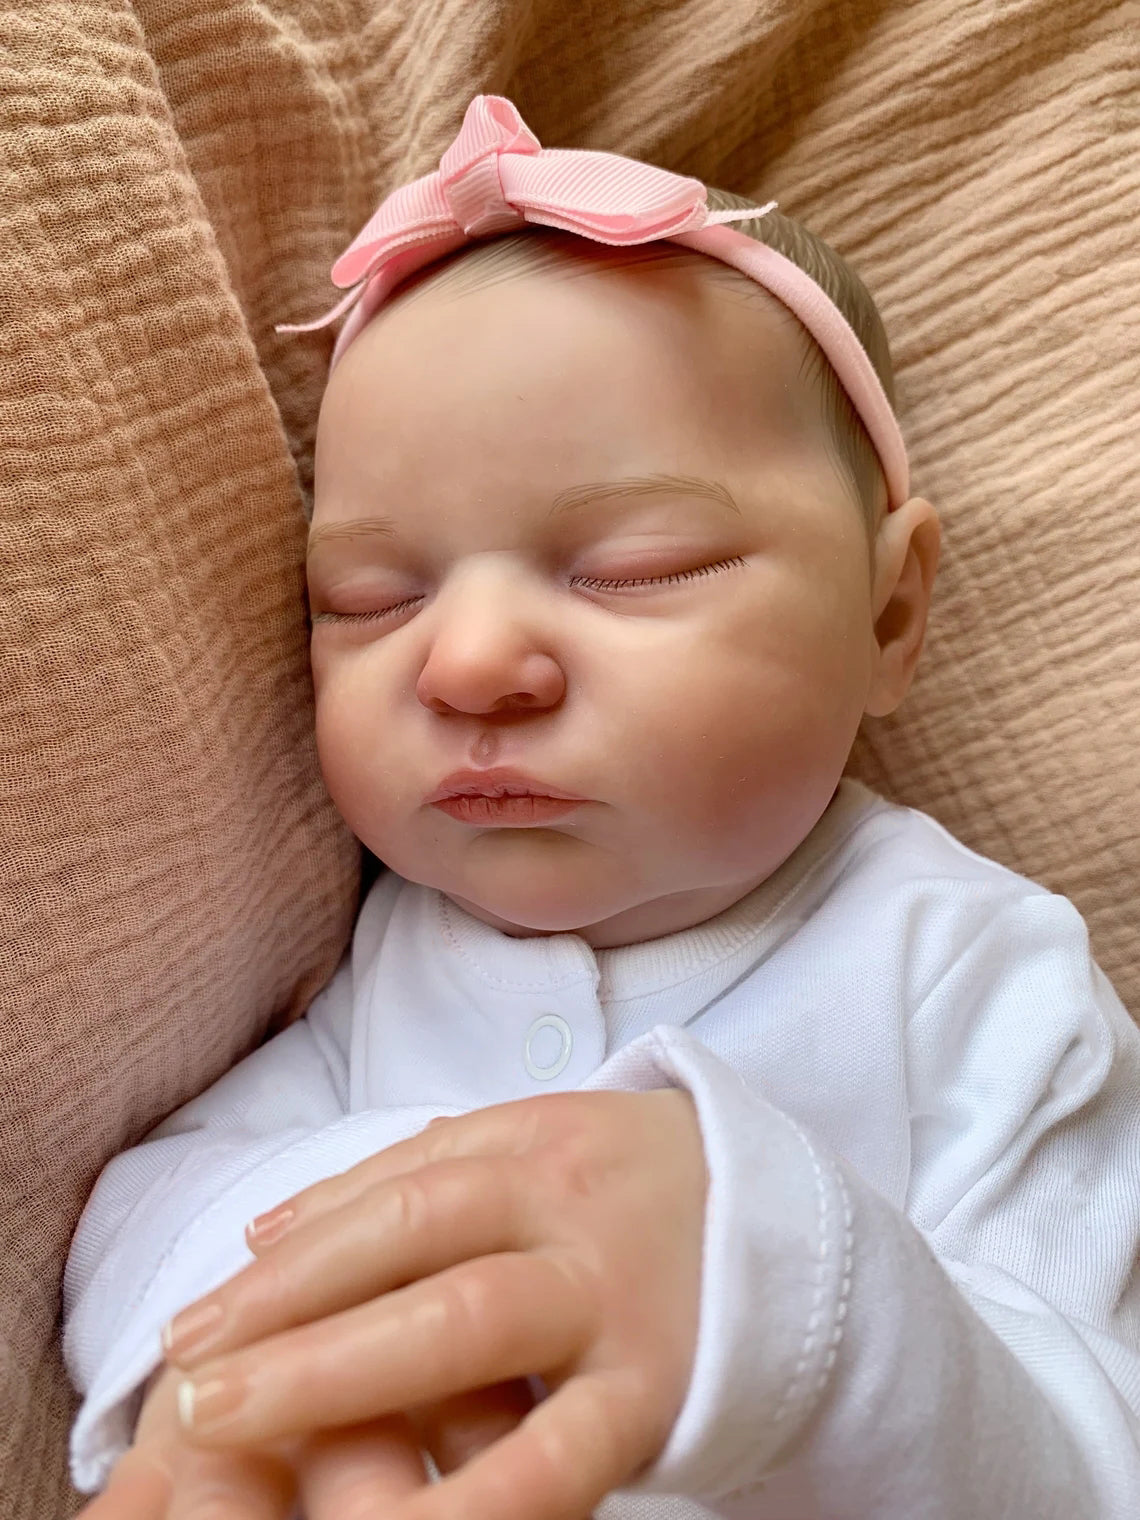 Lifelike Sleeping Girls Reborn Baby Dolls 20 Inches Real Newborn Babies Size That Look Real Baby Realistic Dolls 3D Skin Visible Veins Collectible Art Doll Toys Gifts For 3+ Year Old